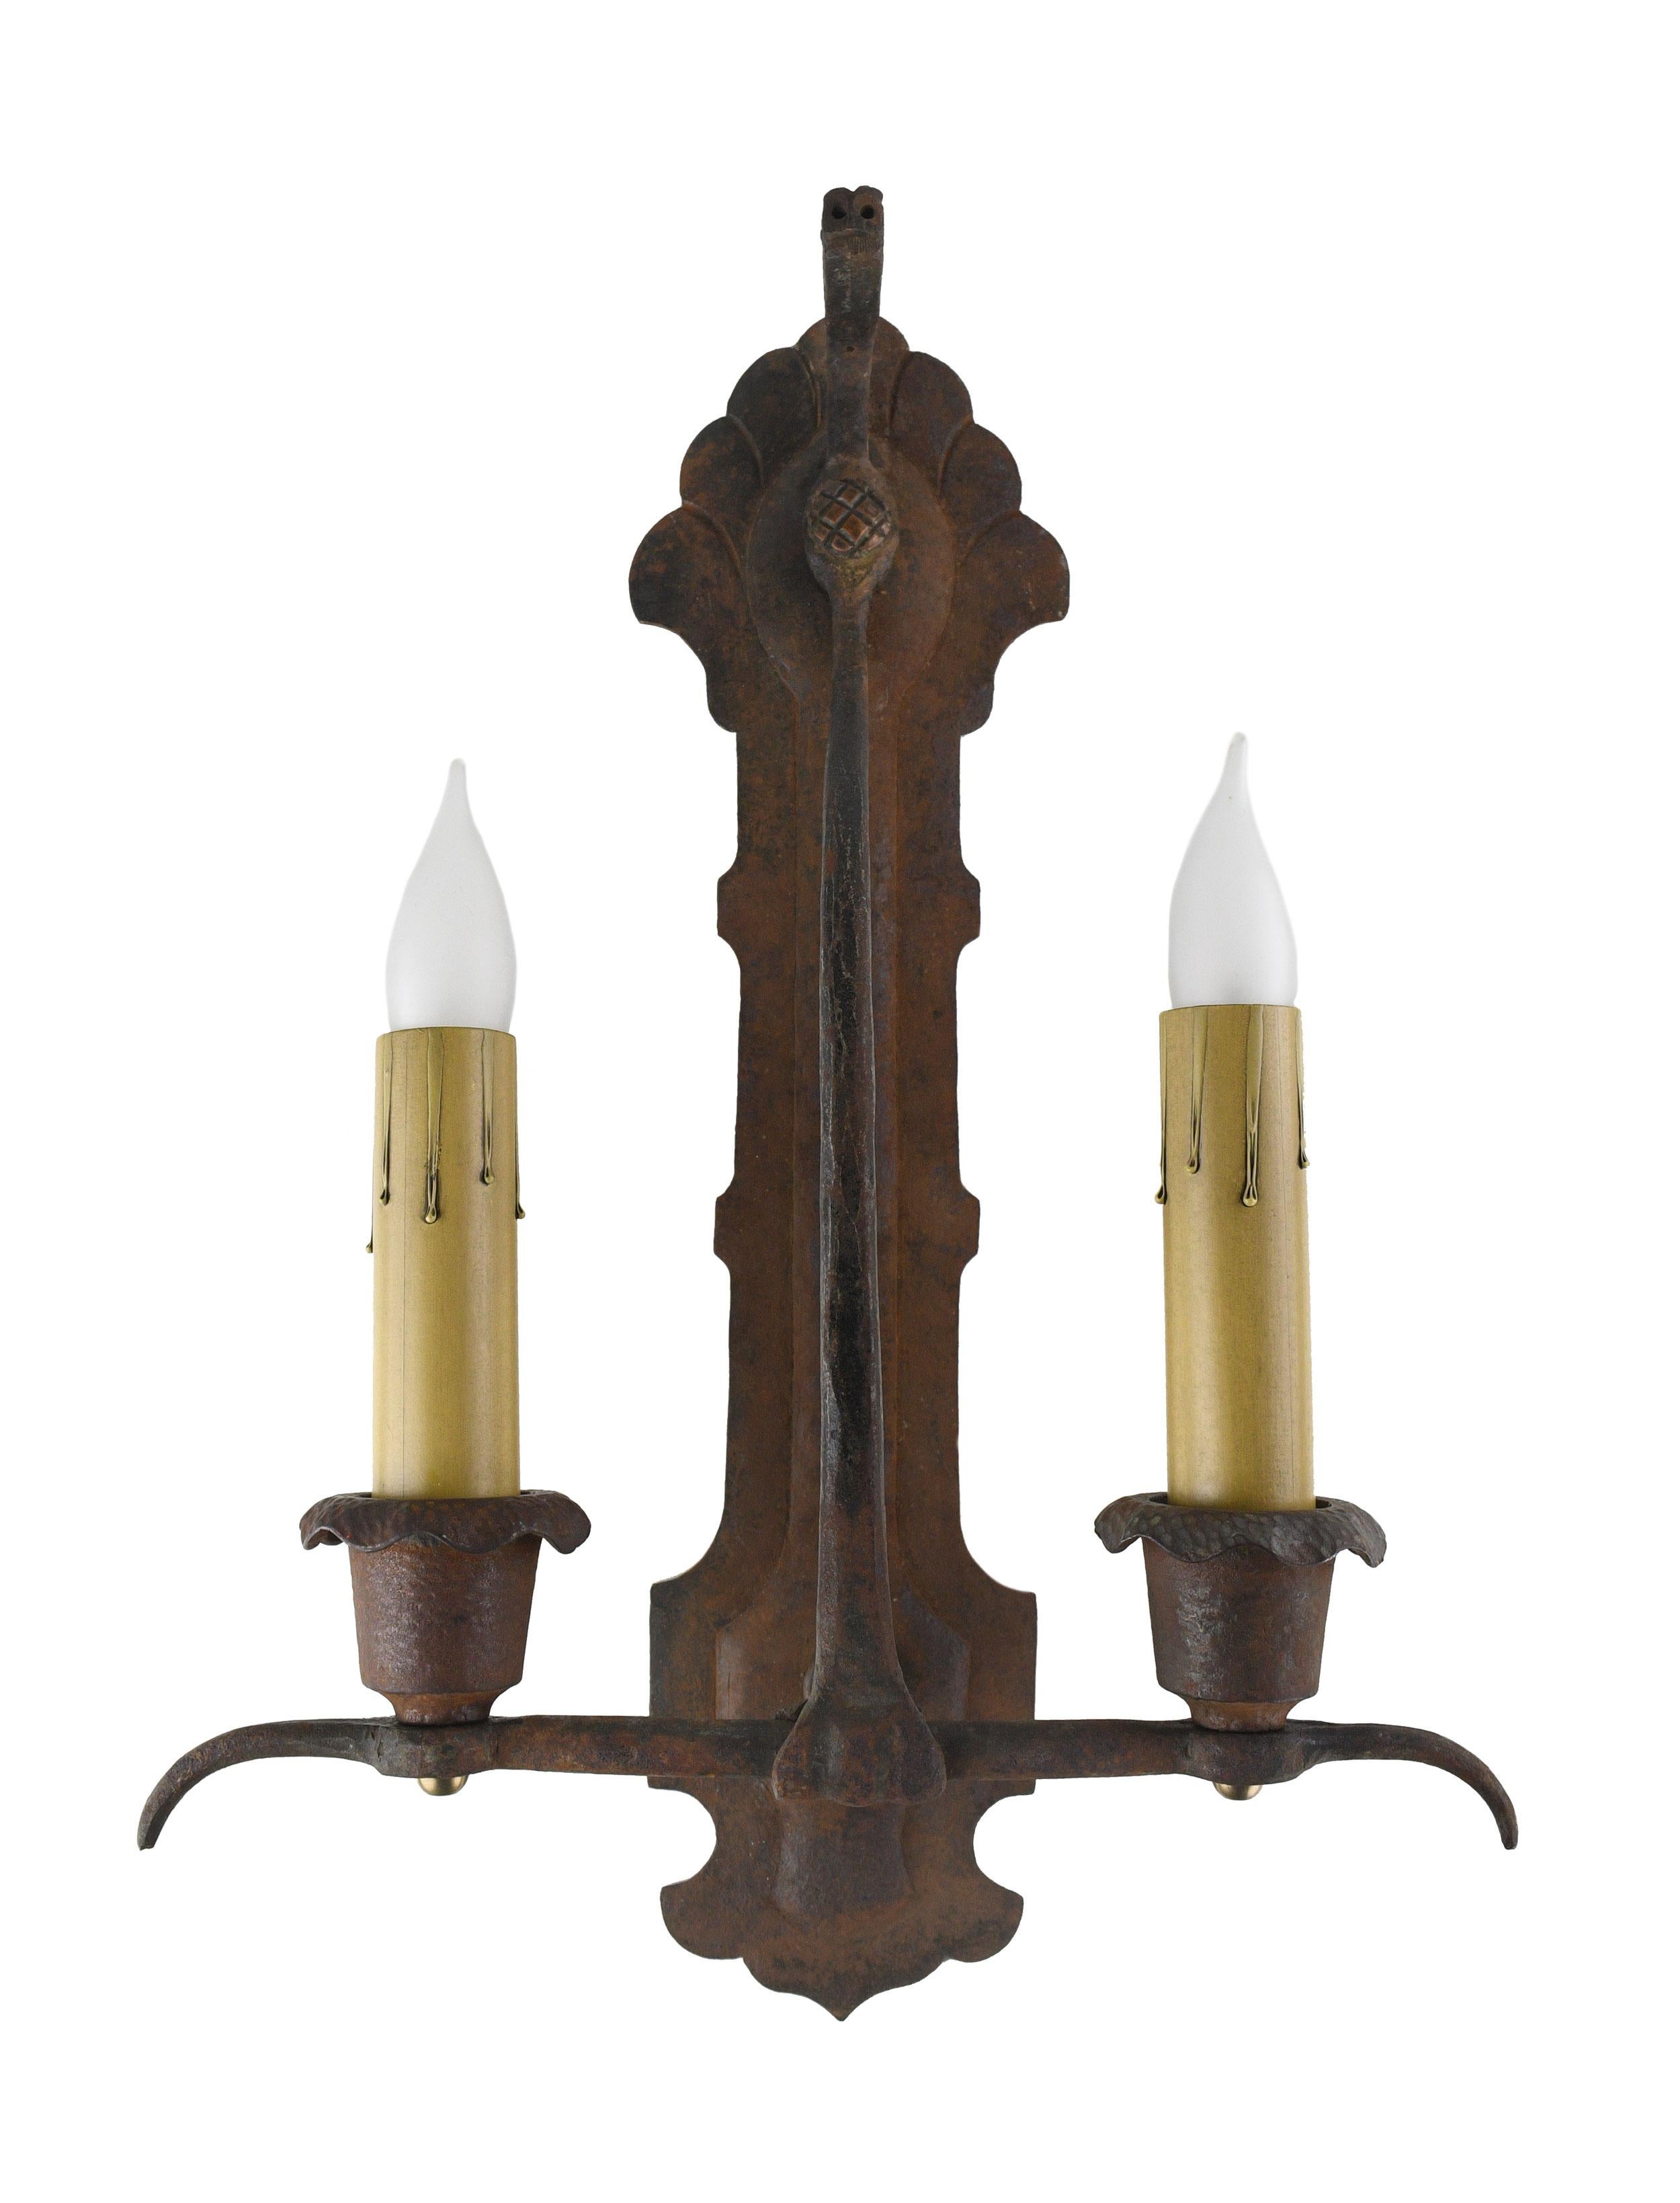 This stunning 2 candle sconce by Oscar Bach is alive with intricate details. A beautifully crafted dragon head centered by a scaly circular button rests at the top of the sconce. The geometric details in the design are pleasingly symmetrical. The